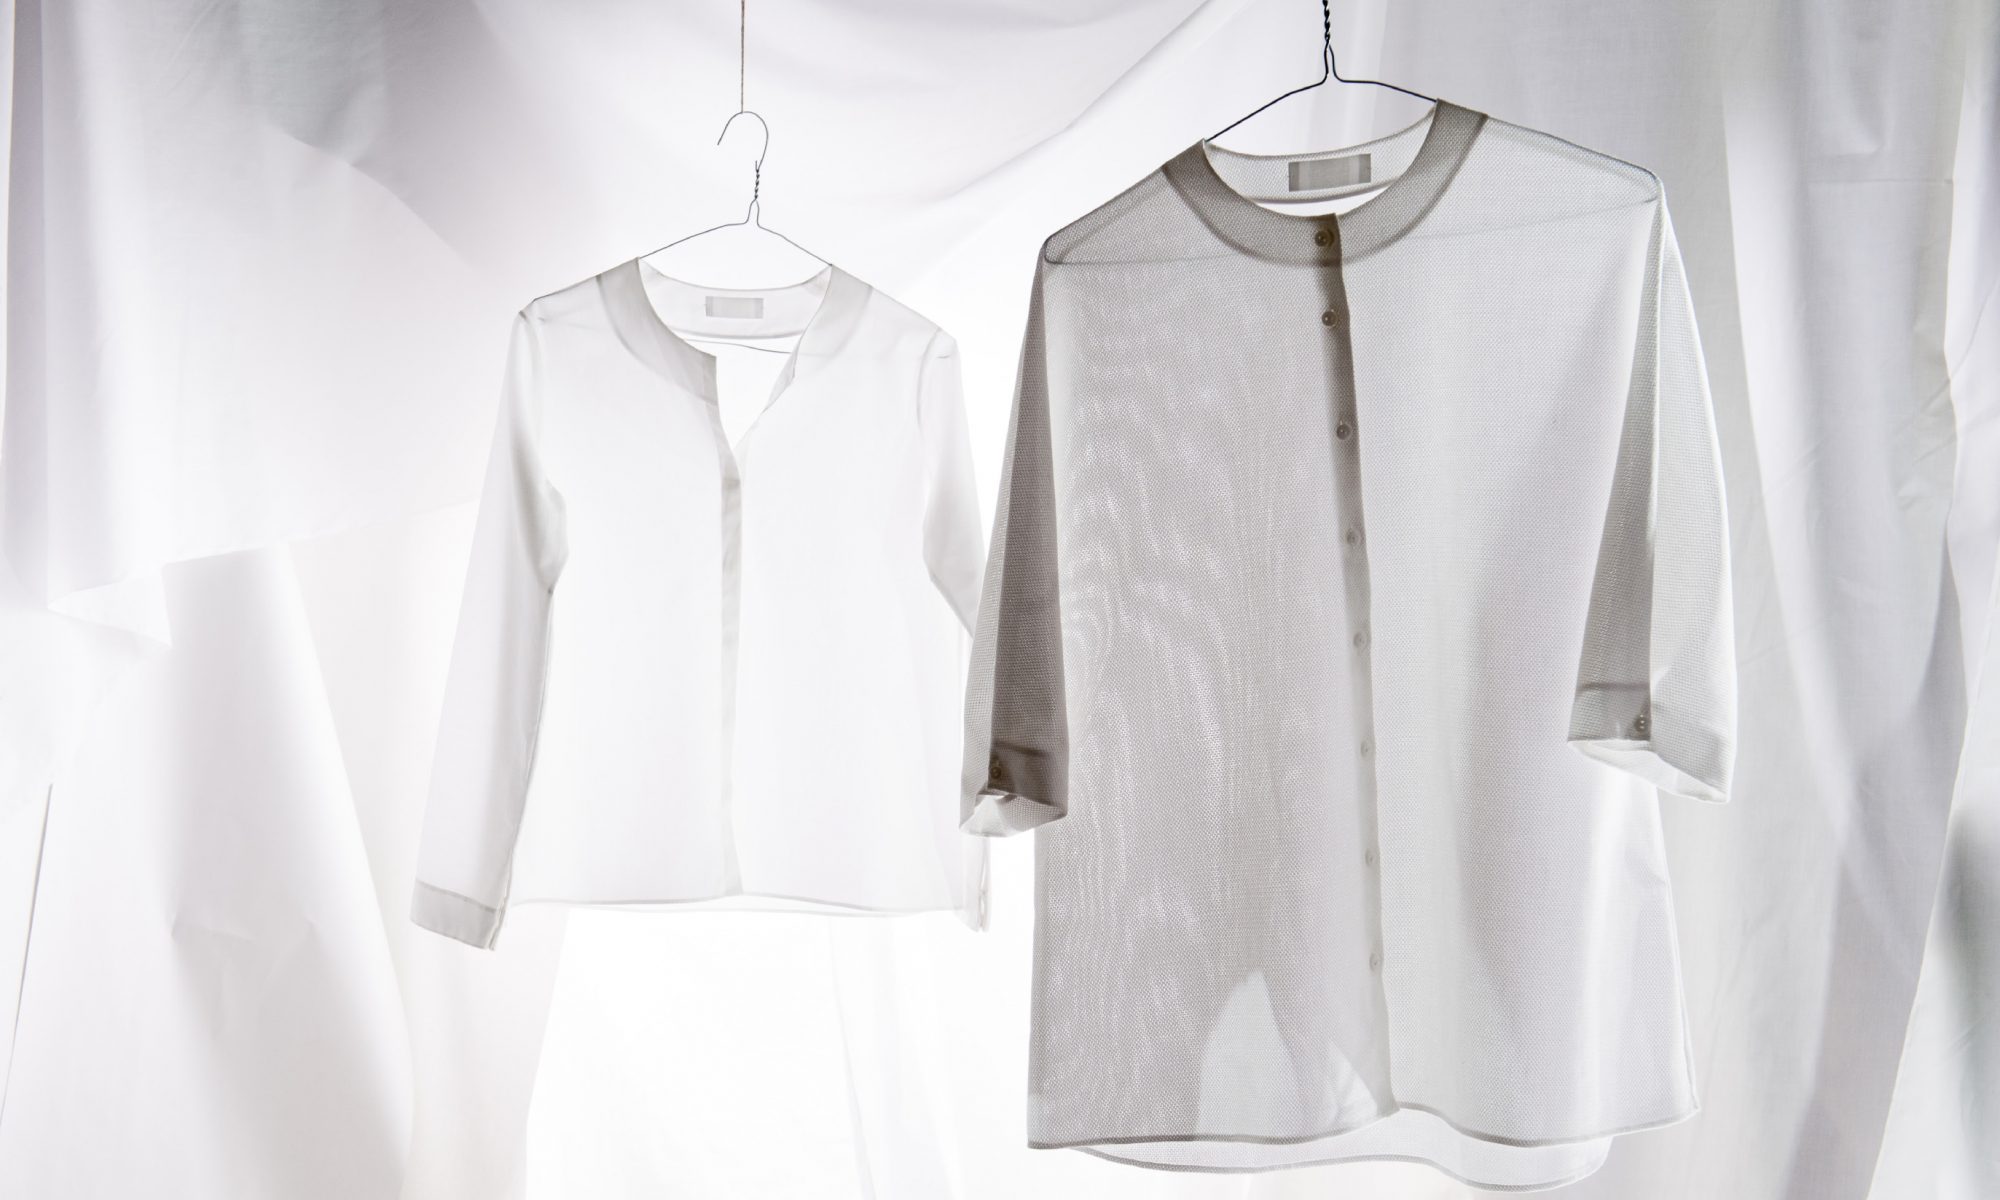 Simple shirt, £230, Buttoned Kimono shirt, £220, In-grid, Worksop in-grid.co